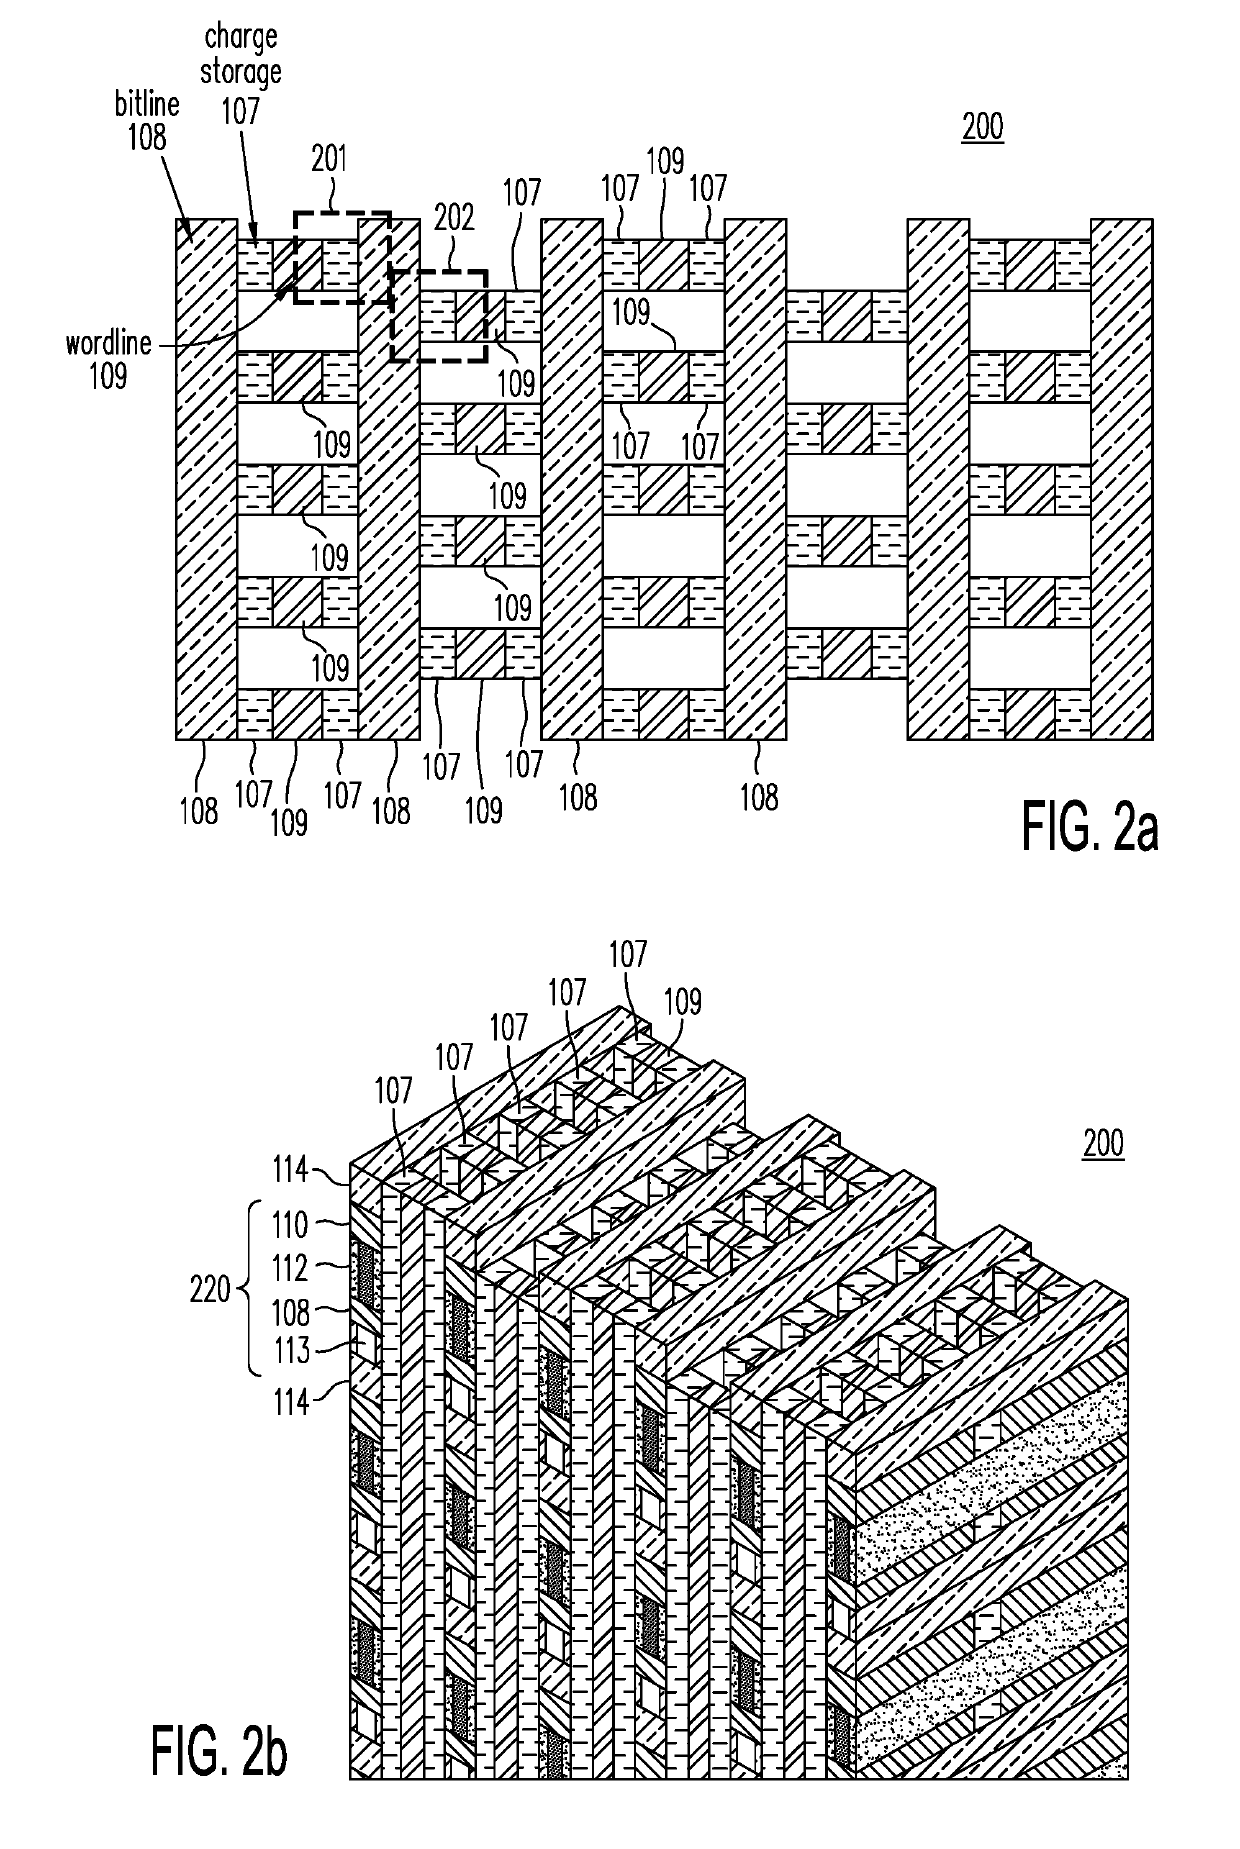 Staggered word line architecture for reduced disturb in 3-dimensional NOR memory arrays